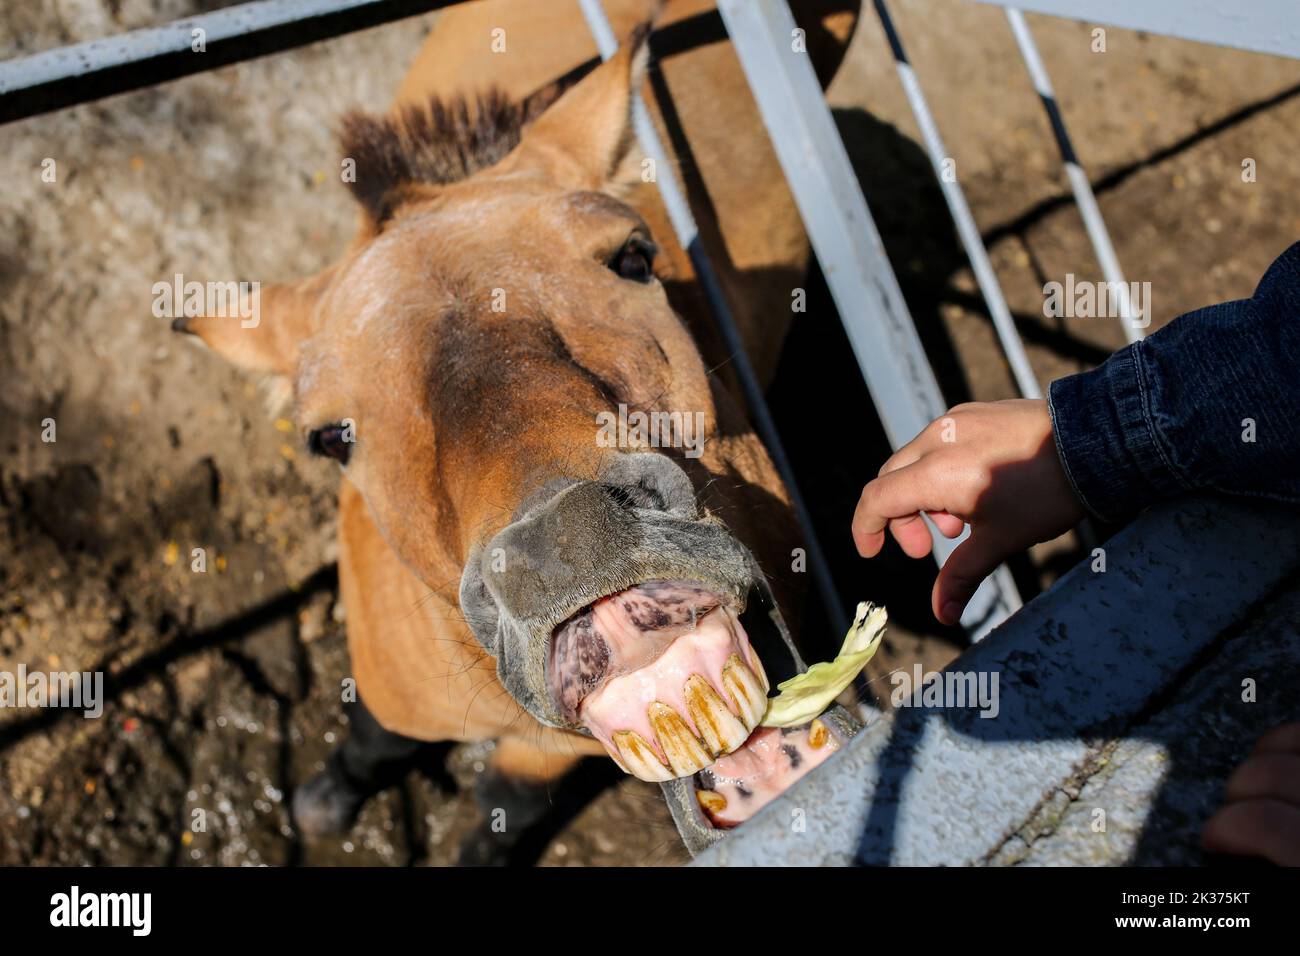 Przewalski's horse is seen eating. One of the oldest in Ukraine, the Odessa Zoo was established in September 1922 In honor of the centenary of the zoo, solemn events were held:1.? memorial plaque was opened to its first director Heinrich Beizert. 2.Ukrposhta issued a special envelope and a stamp. The circulation is limited, only 200 pieces. Stamp cancellation was carried out right at the zoo. 3.Together with the Odessa mayor Gennady Trukhanov, the director of the zoo, Igor Belyakov, opened a new lion cub.In April, a pair of white lions from the Feldman Ecopark in Kharkiv arrived in Odessa. Kh Stock Photo